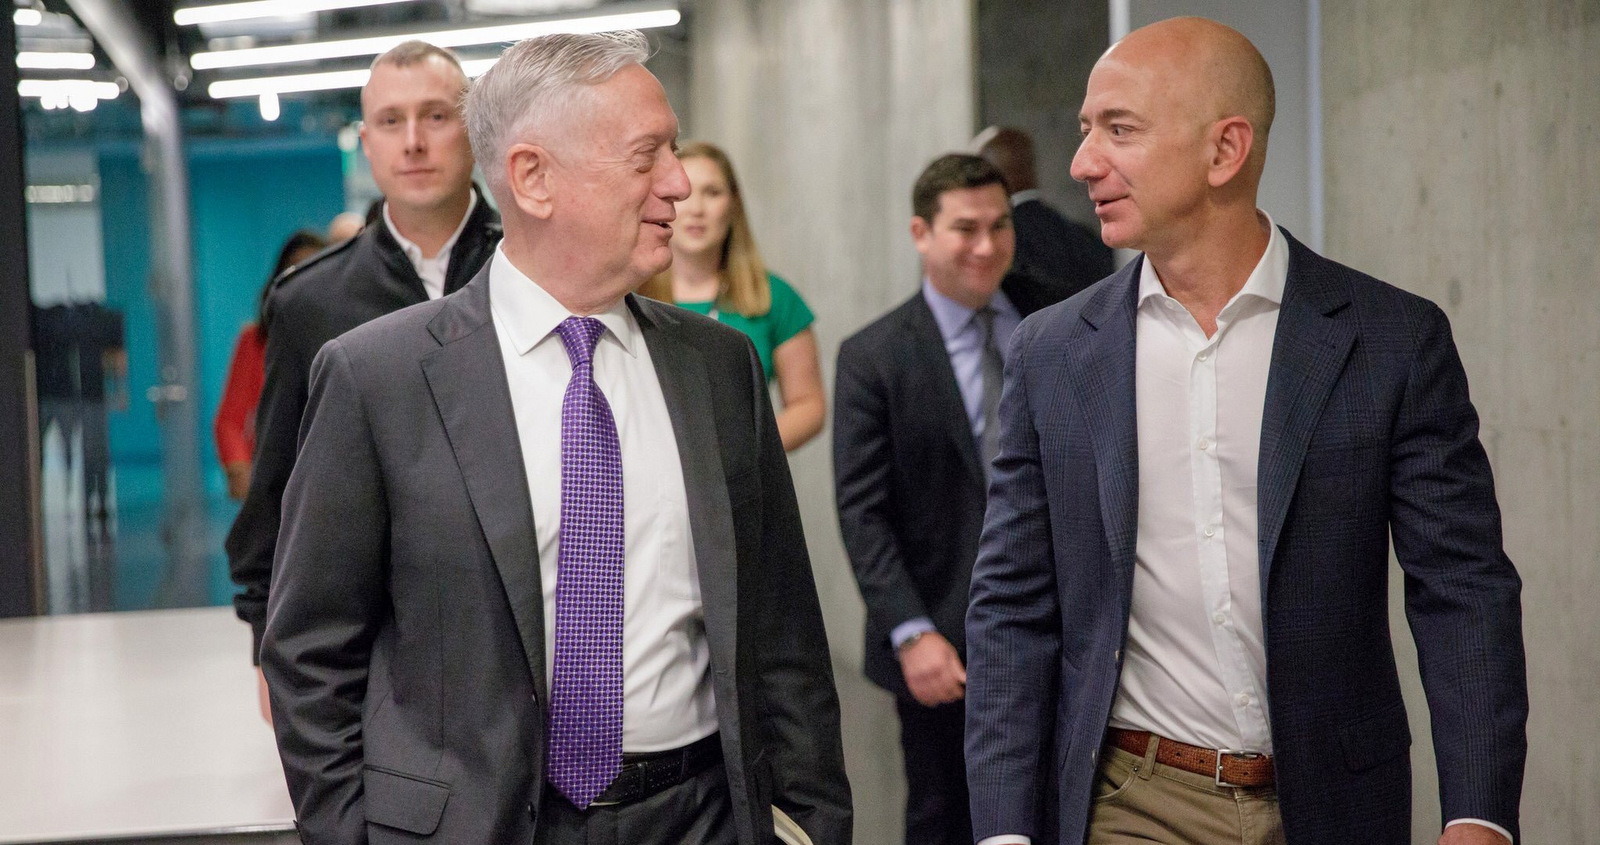 Defense Secretary James Mattis chats with Amazon founder and Washington Post owner, Jeff Bezos , during a visit to west coast tech and defense companies. Jeff Bezos | Twitter